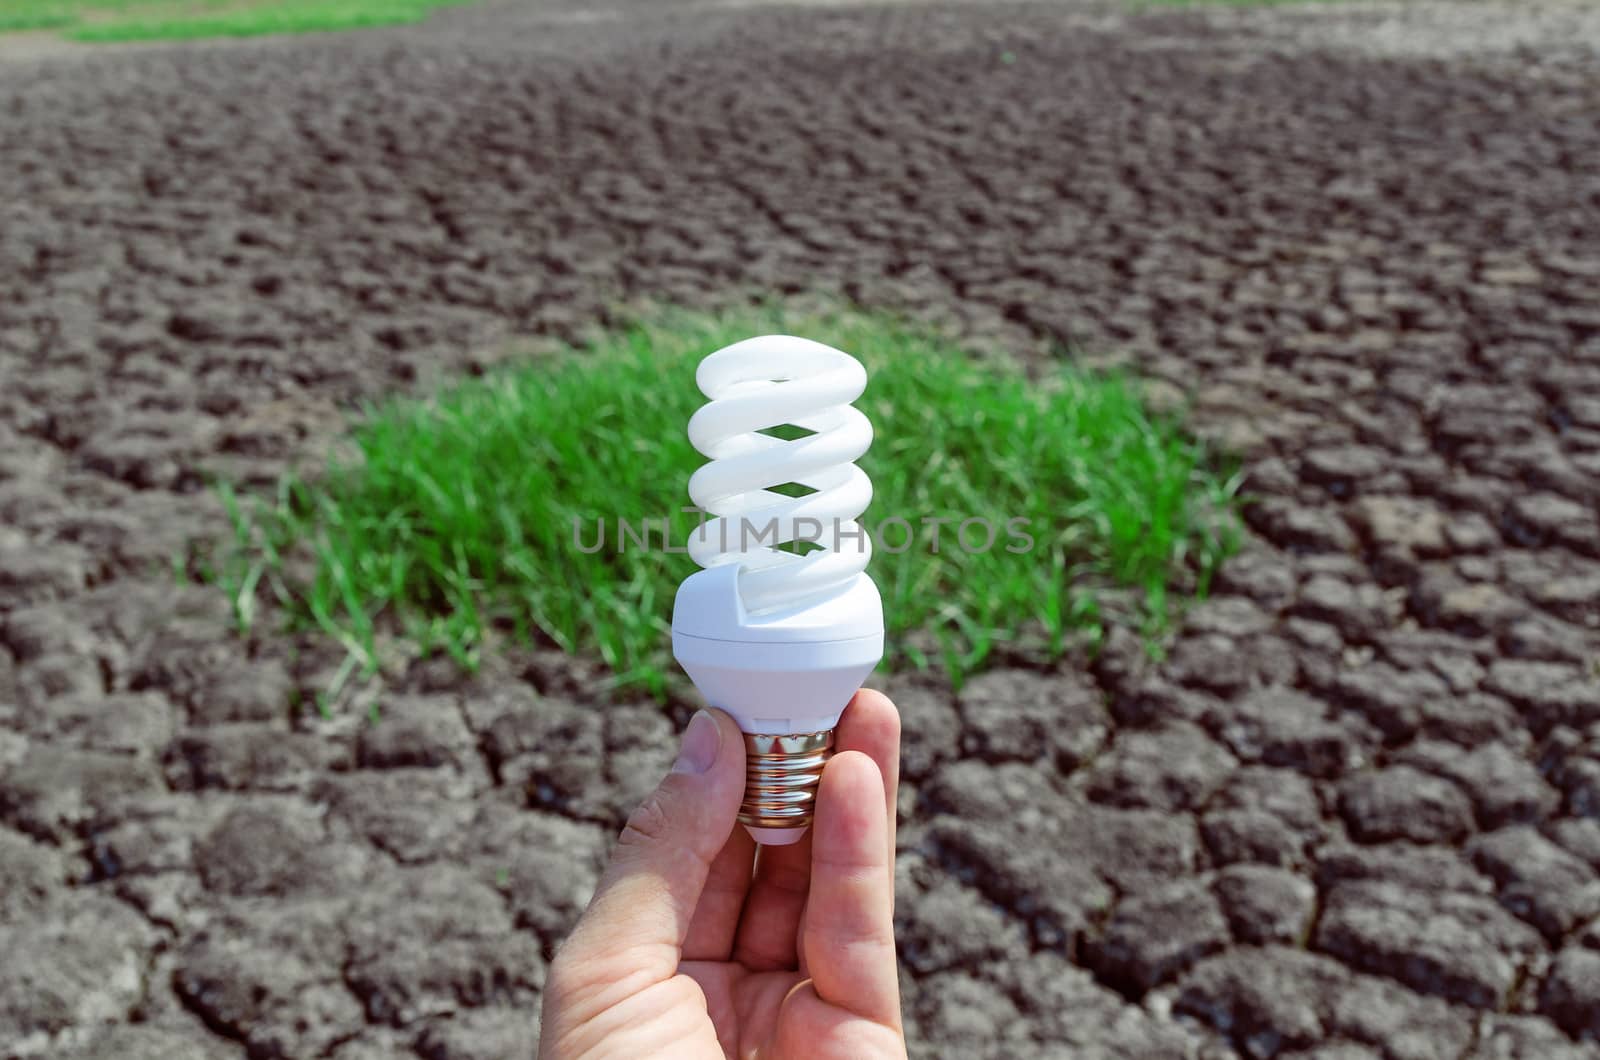 eco bulb in hand over desert and green grass